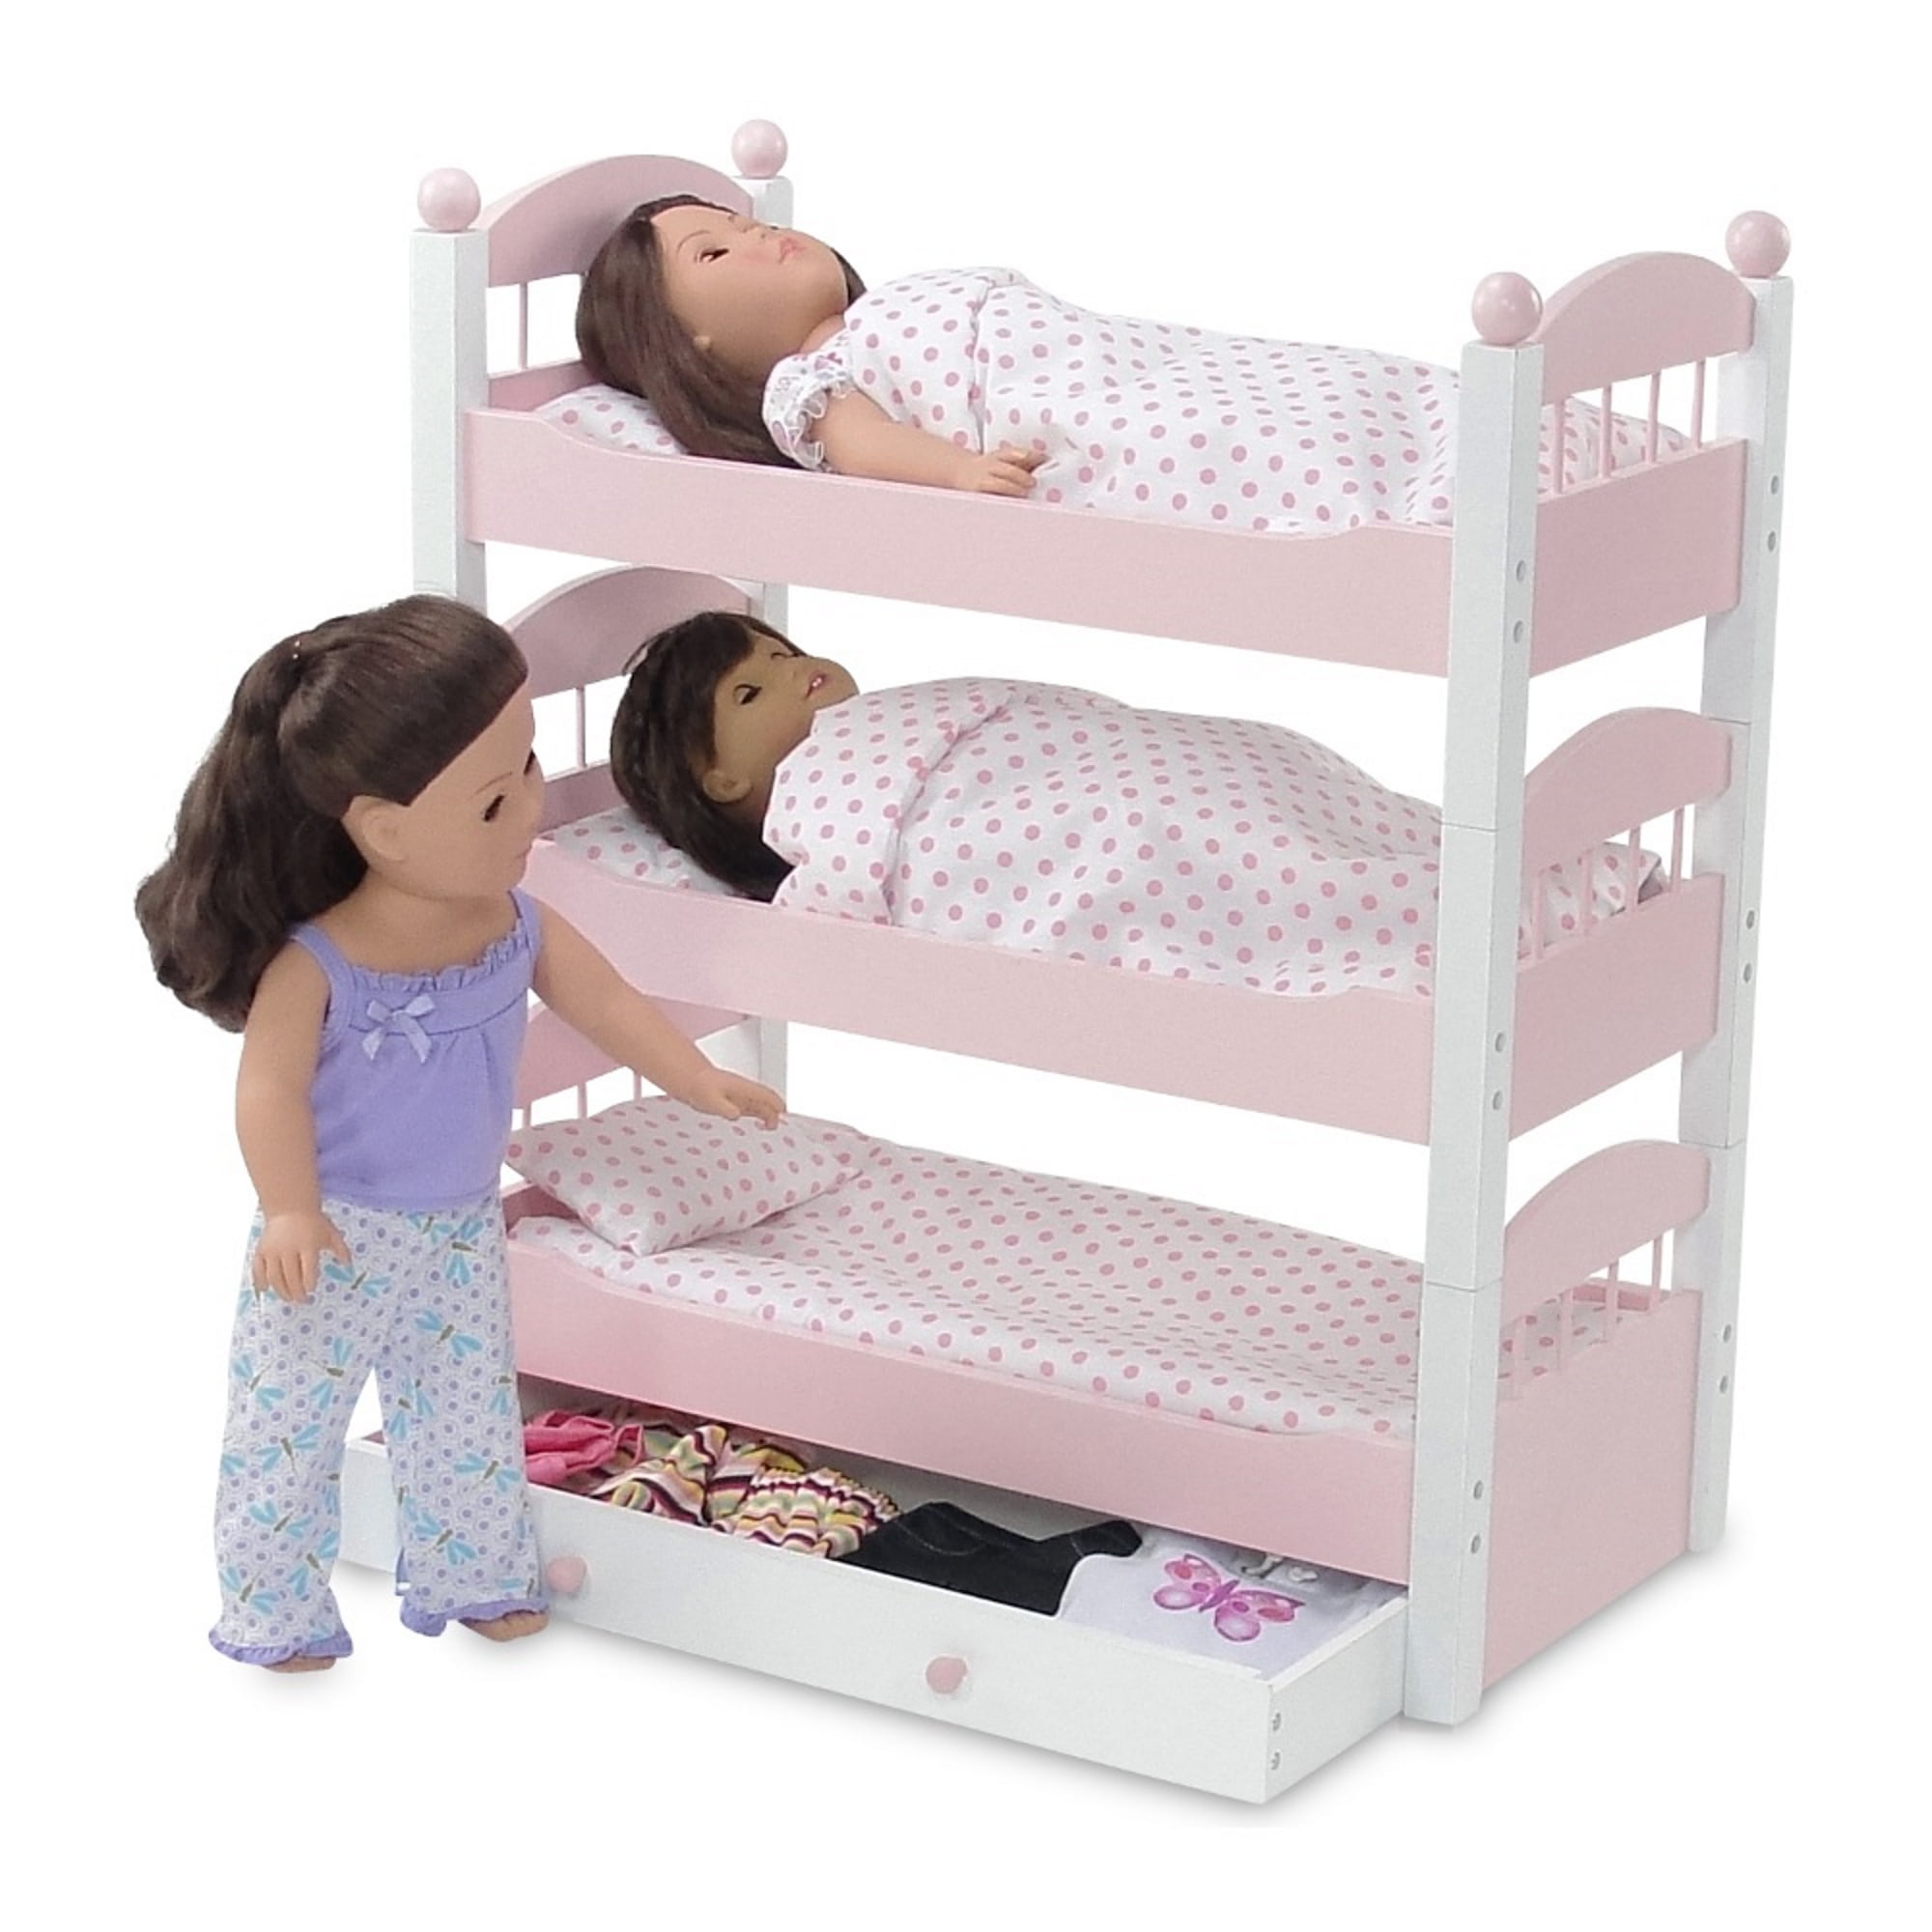 Doll Bed 18 Inch Bunk Storage Closet Clothes Ladder American Girl Pretend Play